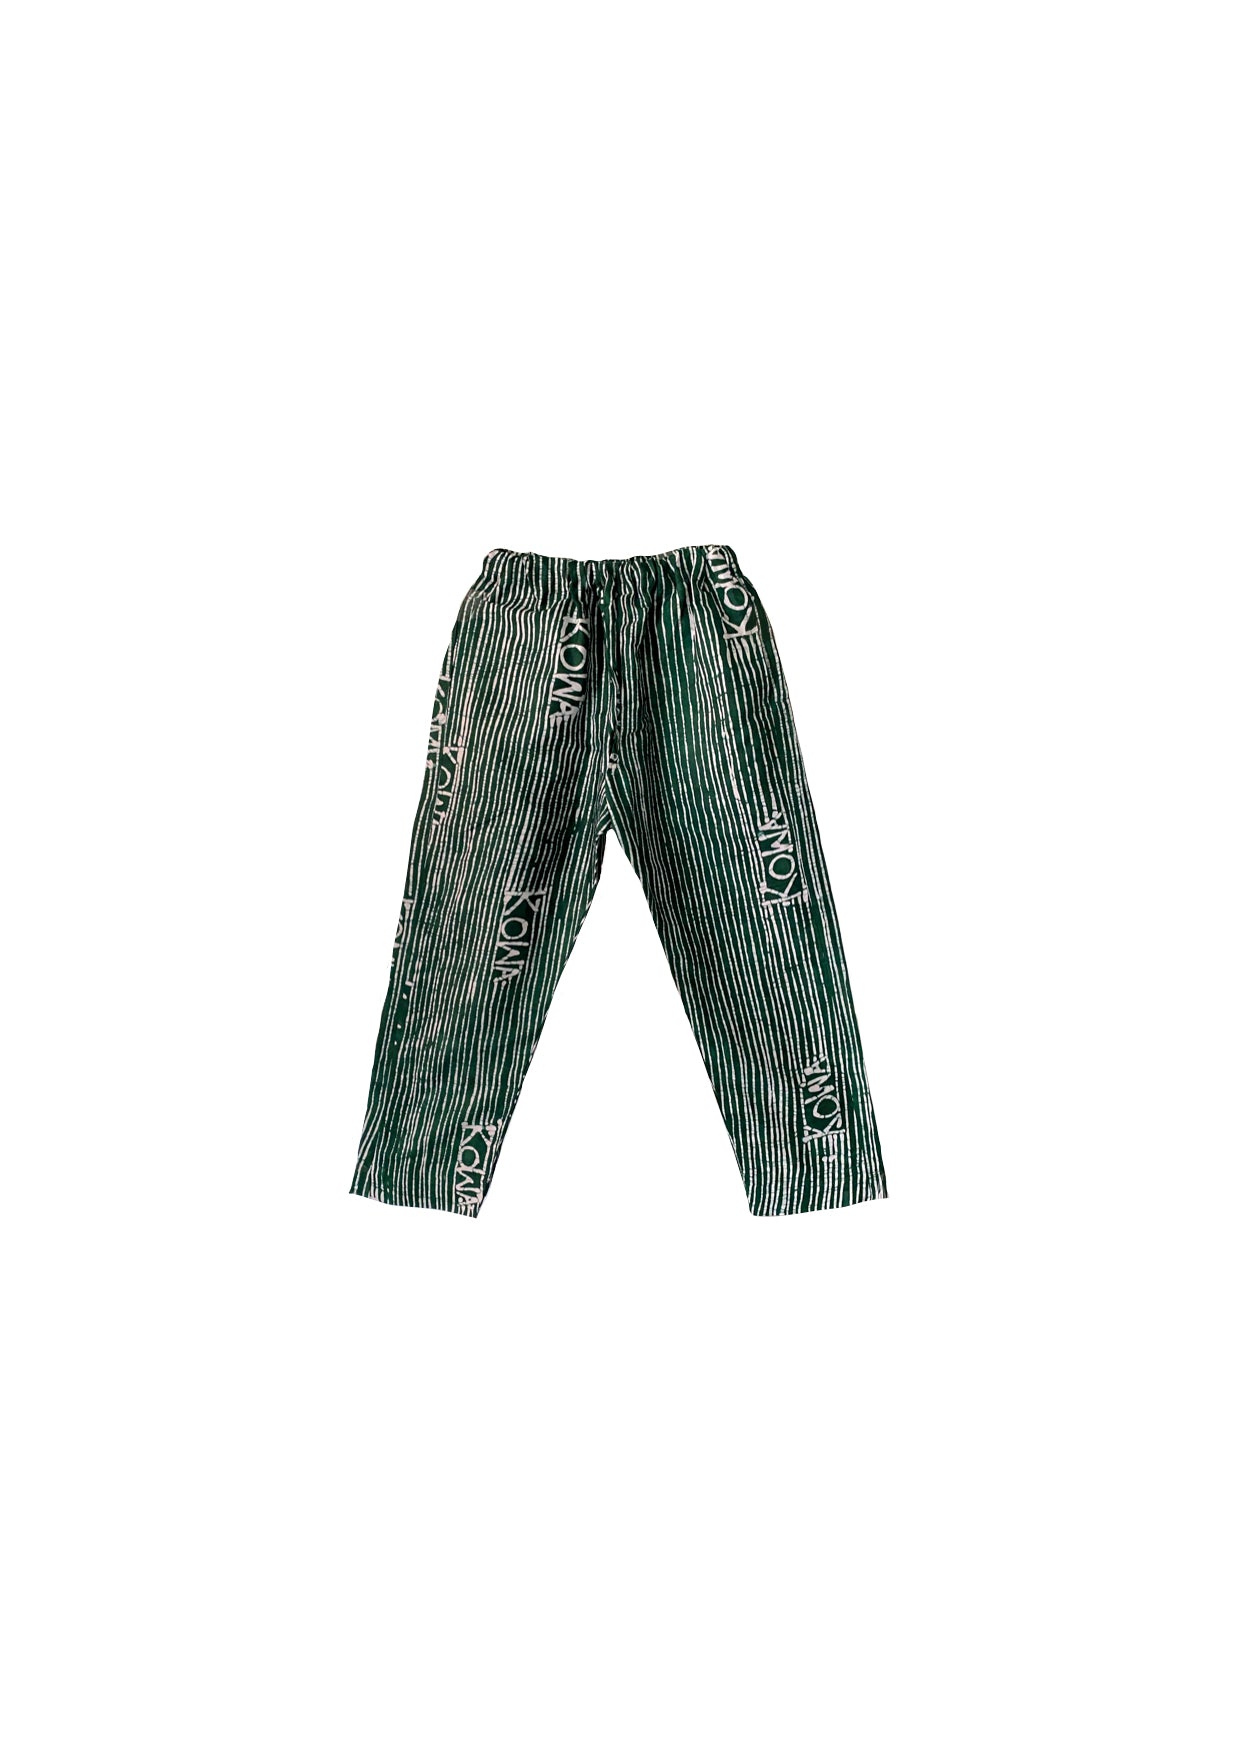 Trousers- Kowa lines- Green and white